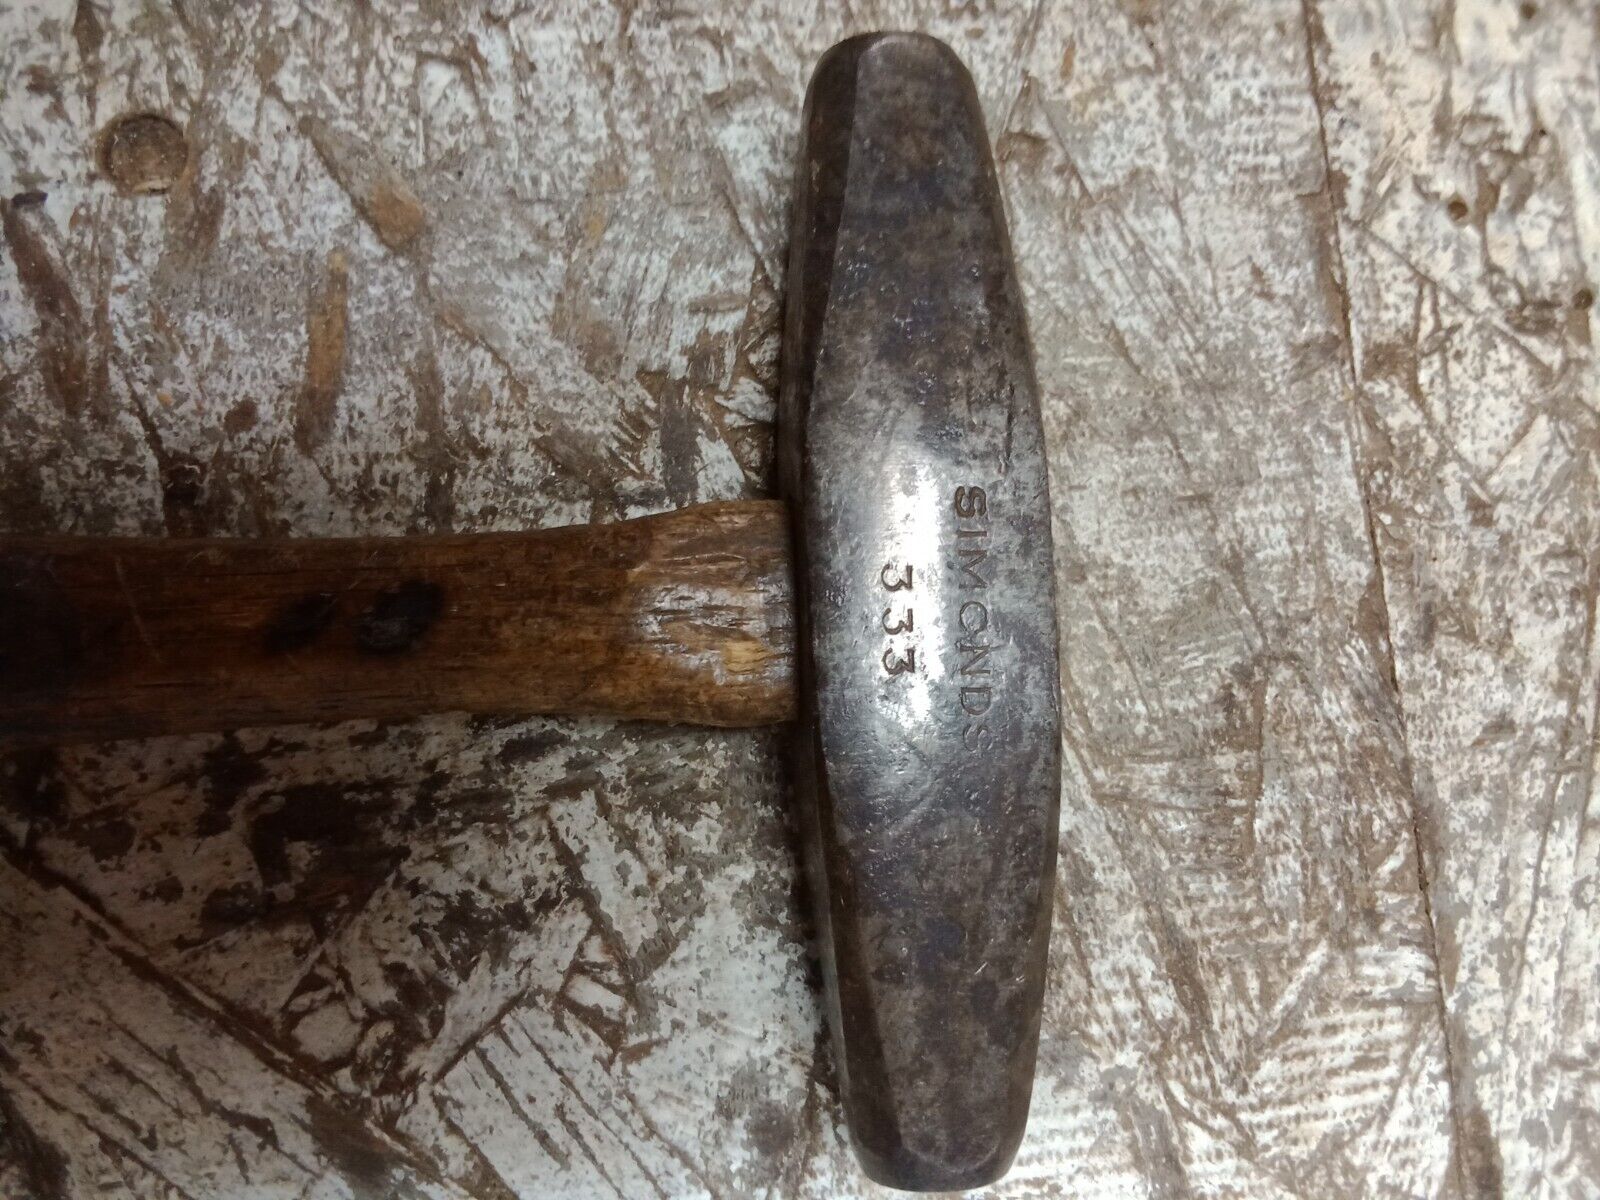 Simond's No. 333 Crosscut Saw Hammer, Extremely Rare